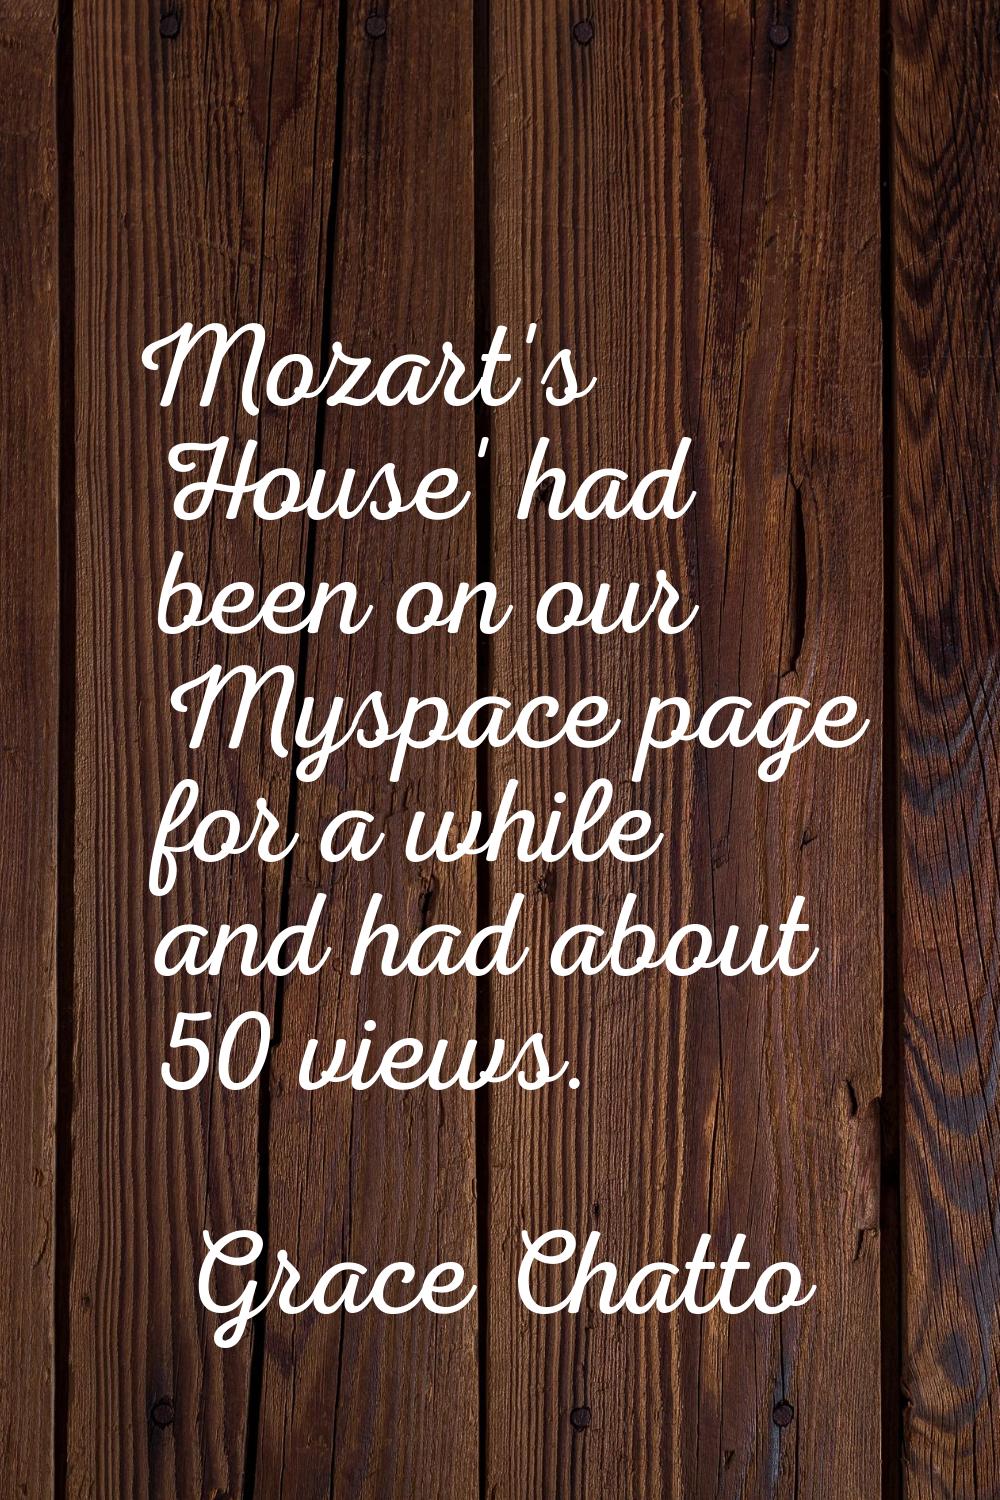 Mozart's House' had been on our Myspace page for a while and had about 50 views.